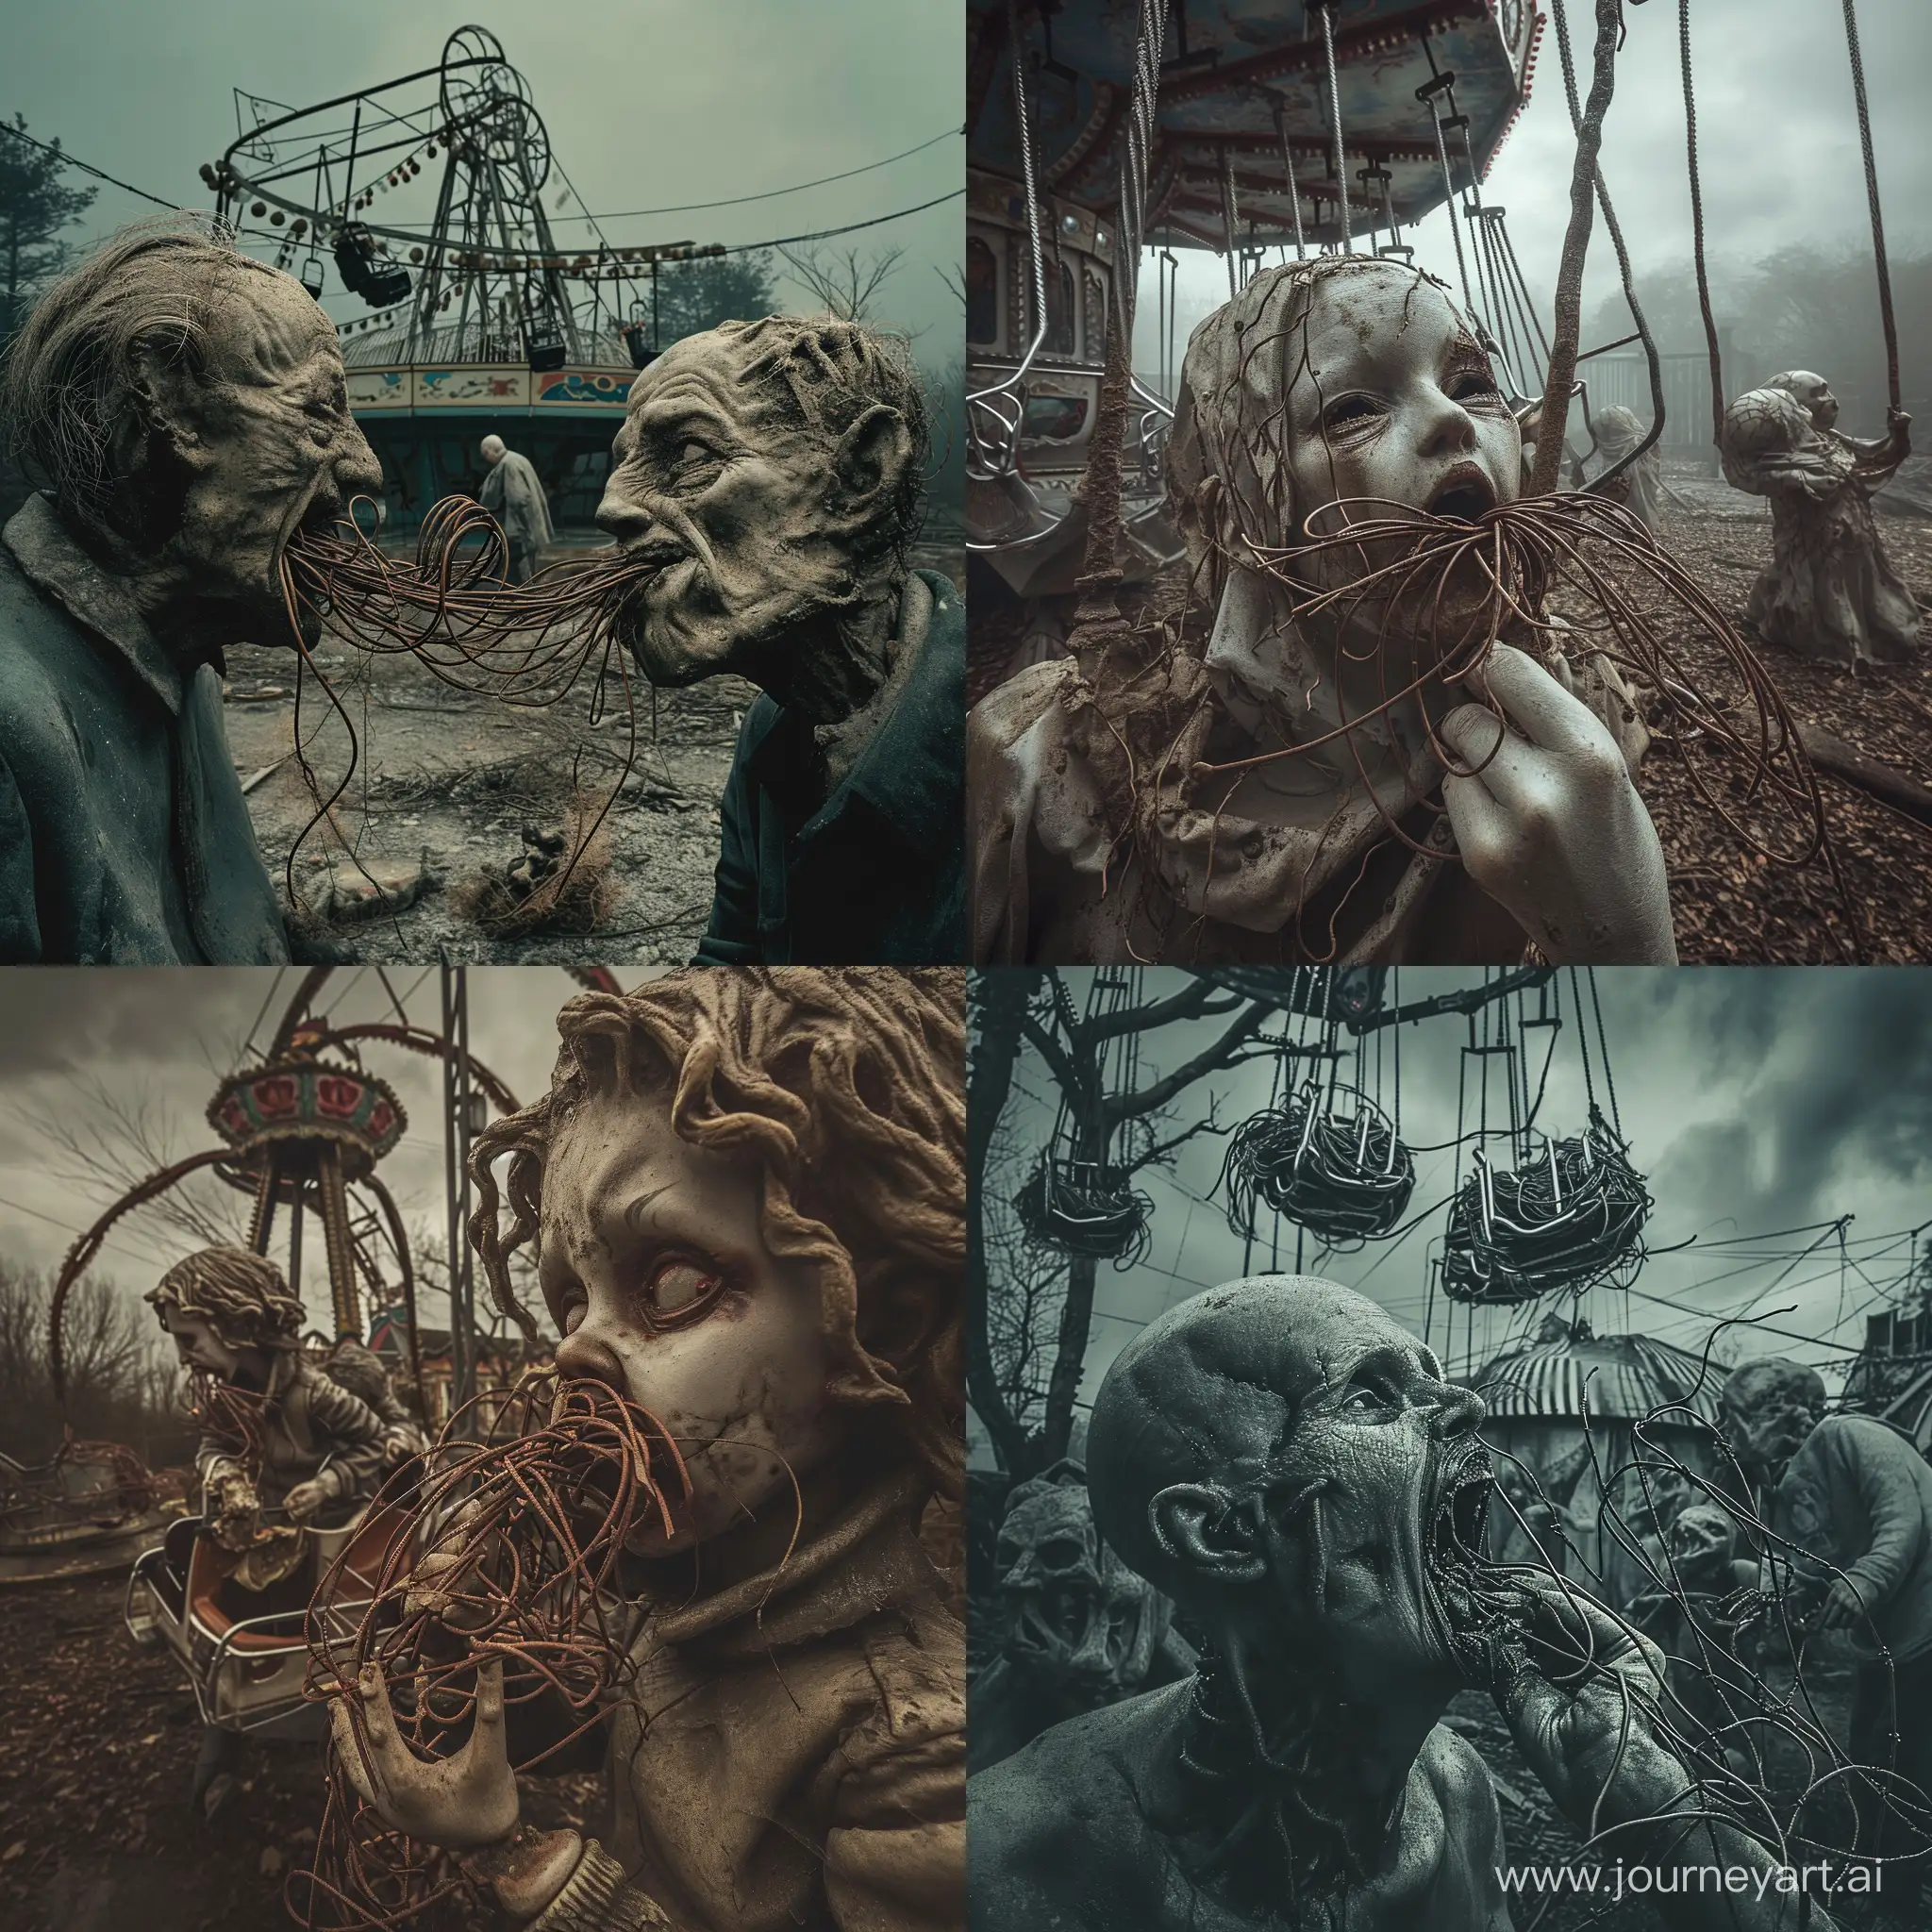 Abandoned amusement park, decrepit ride. Weird people eating rusted wire. Beksinski style, grotesque, haunting, unsettling, dark.